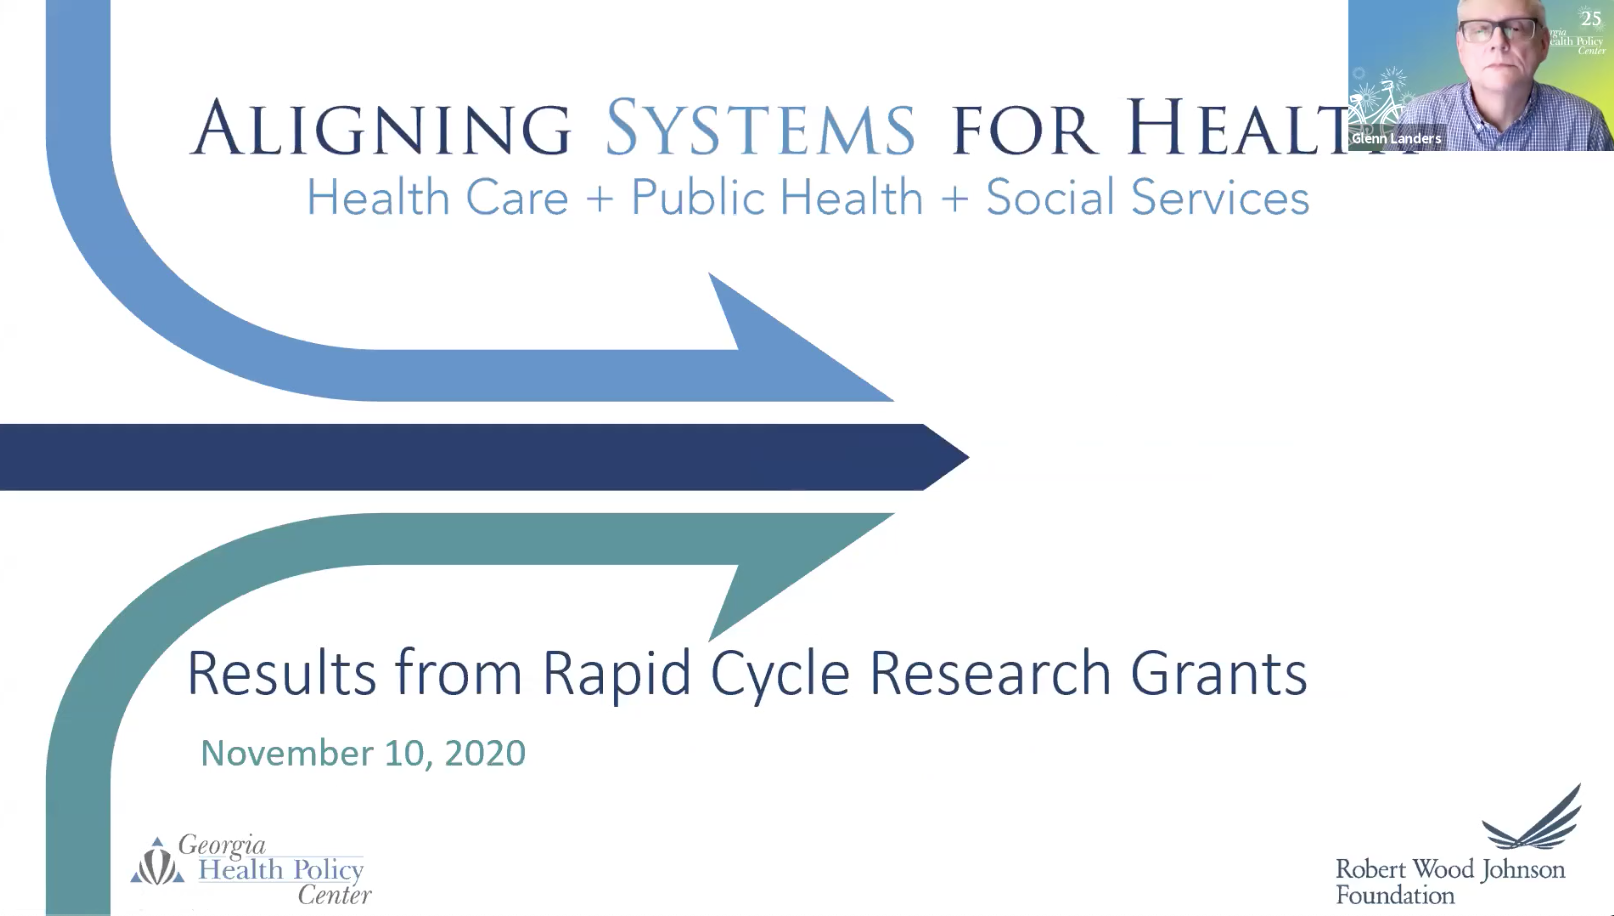 Aligning Systems for Health: Results from Rapid Cycle Research Grants